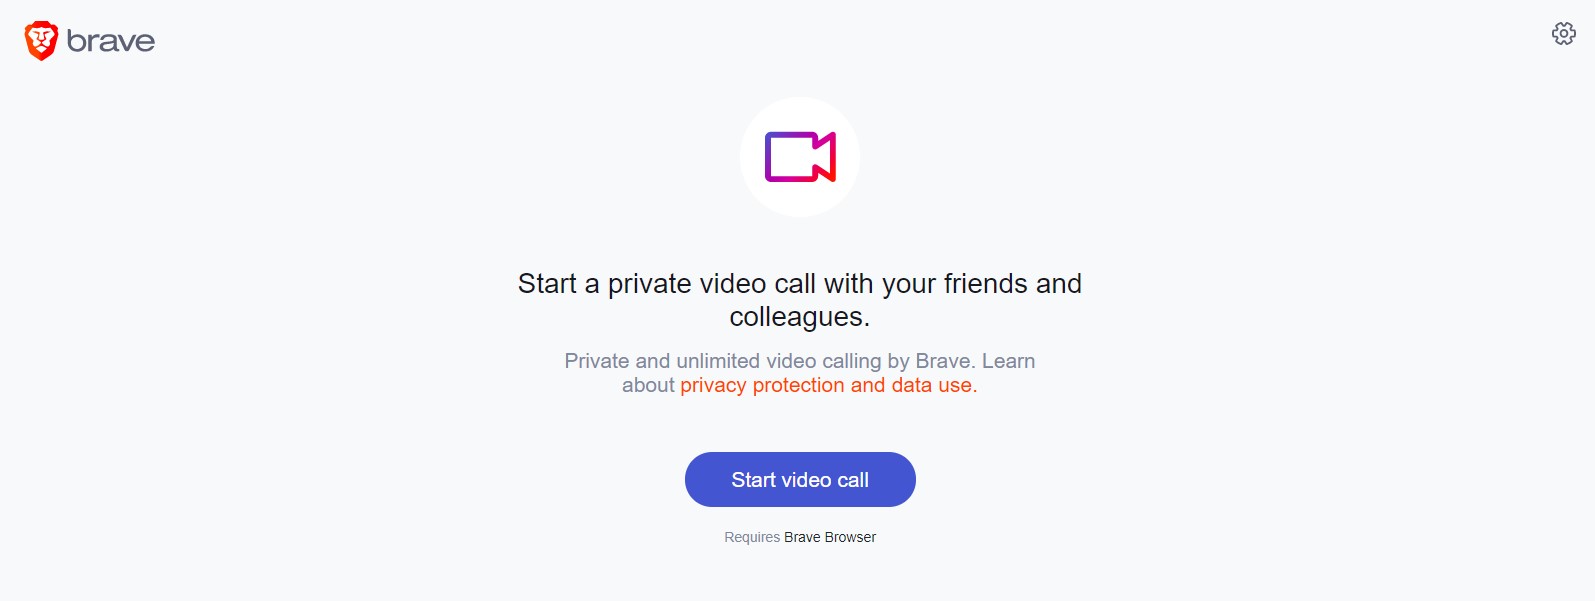 brave together in-browser video calling service